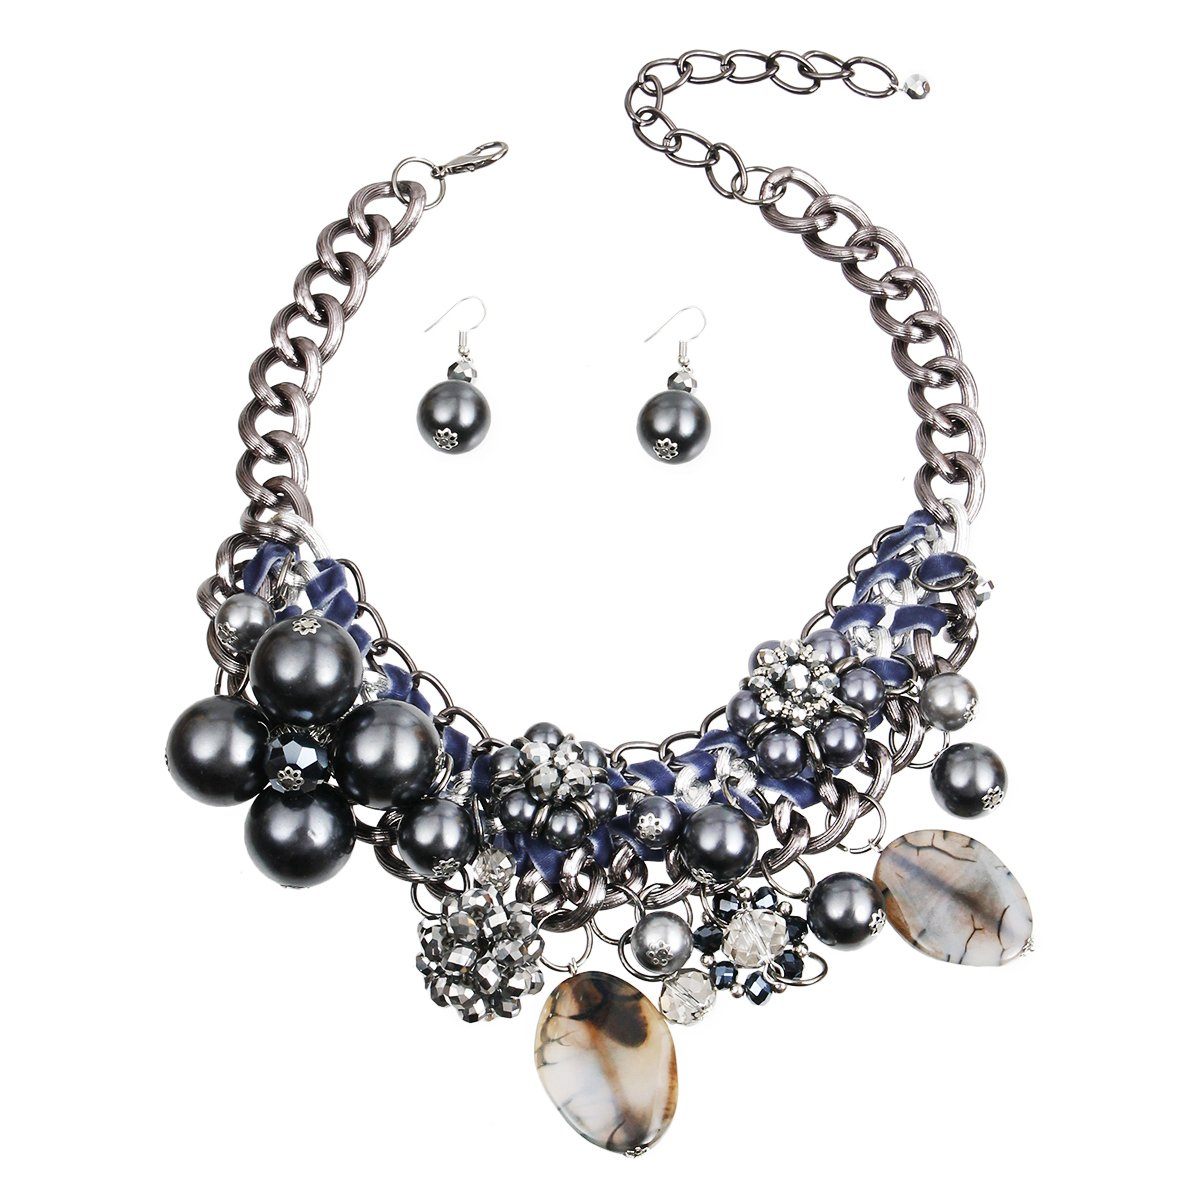 Chunky Chain Hematite Pearl, Crystal, and Bead Charm Necklace Set